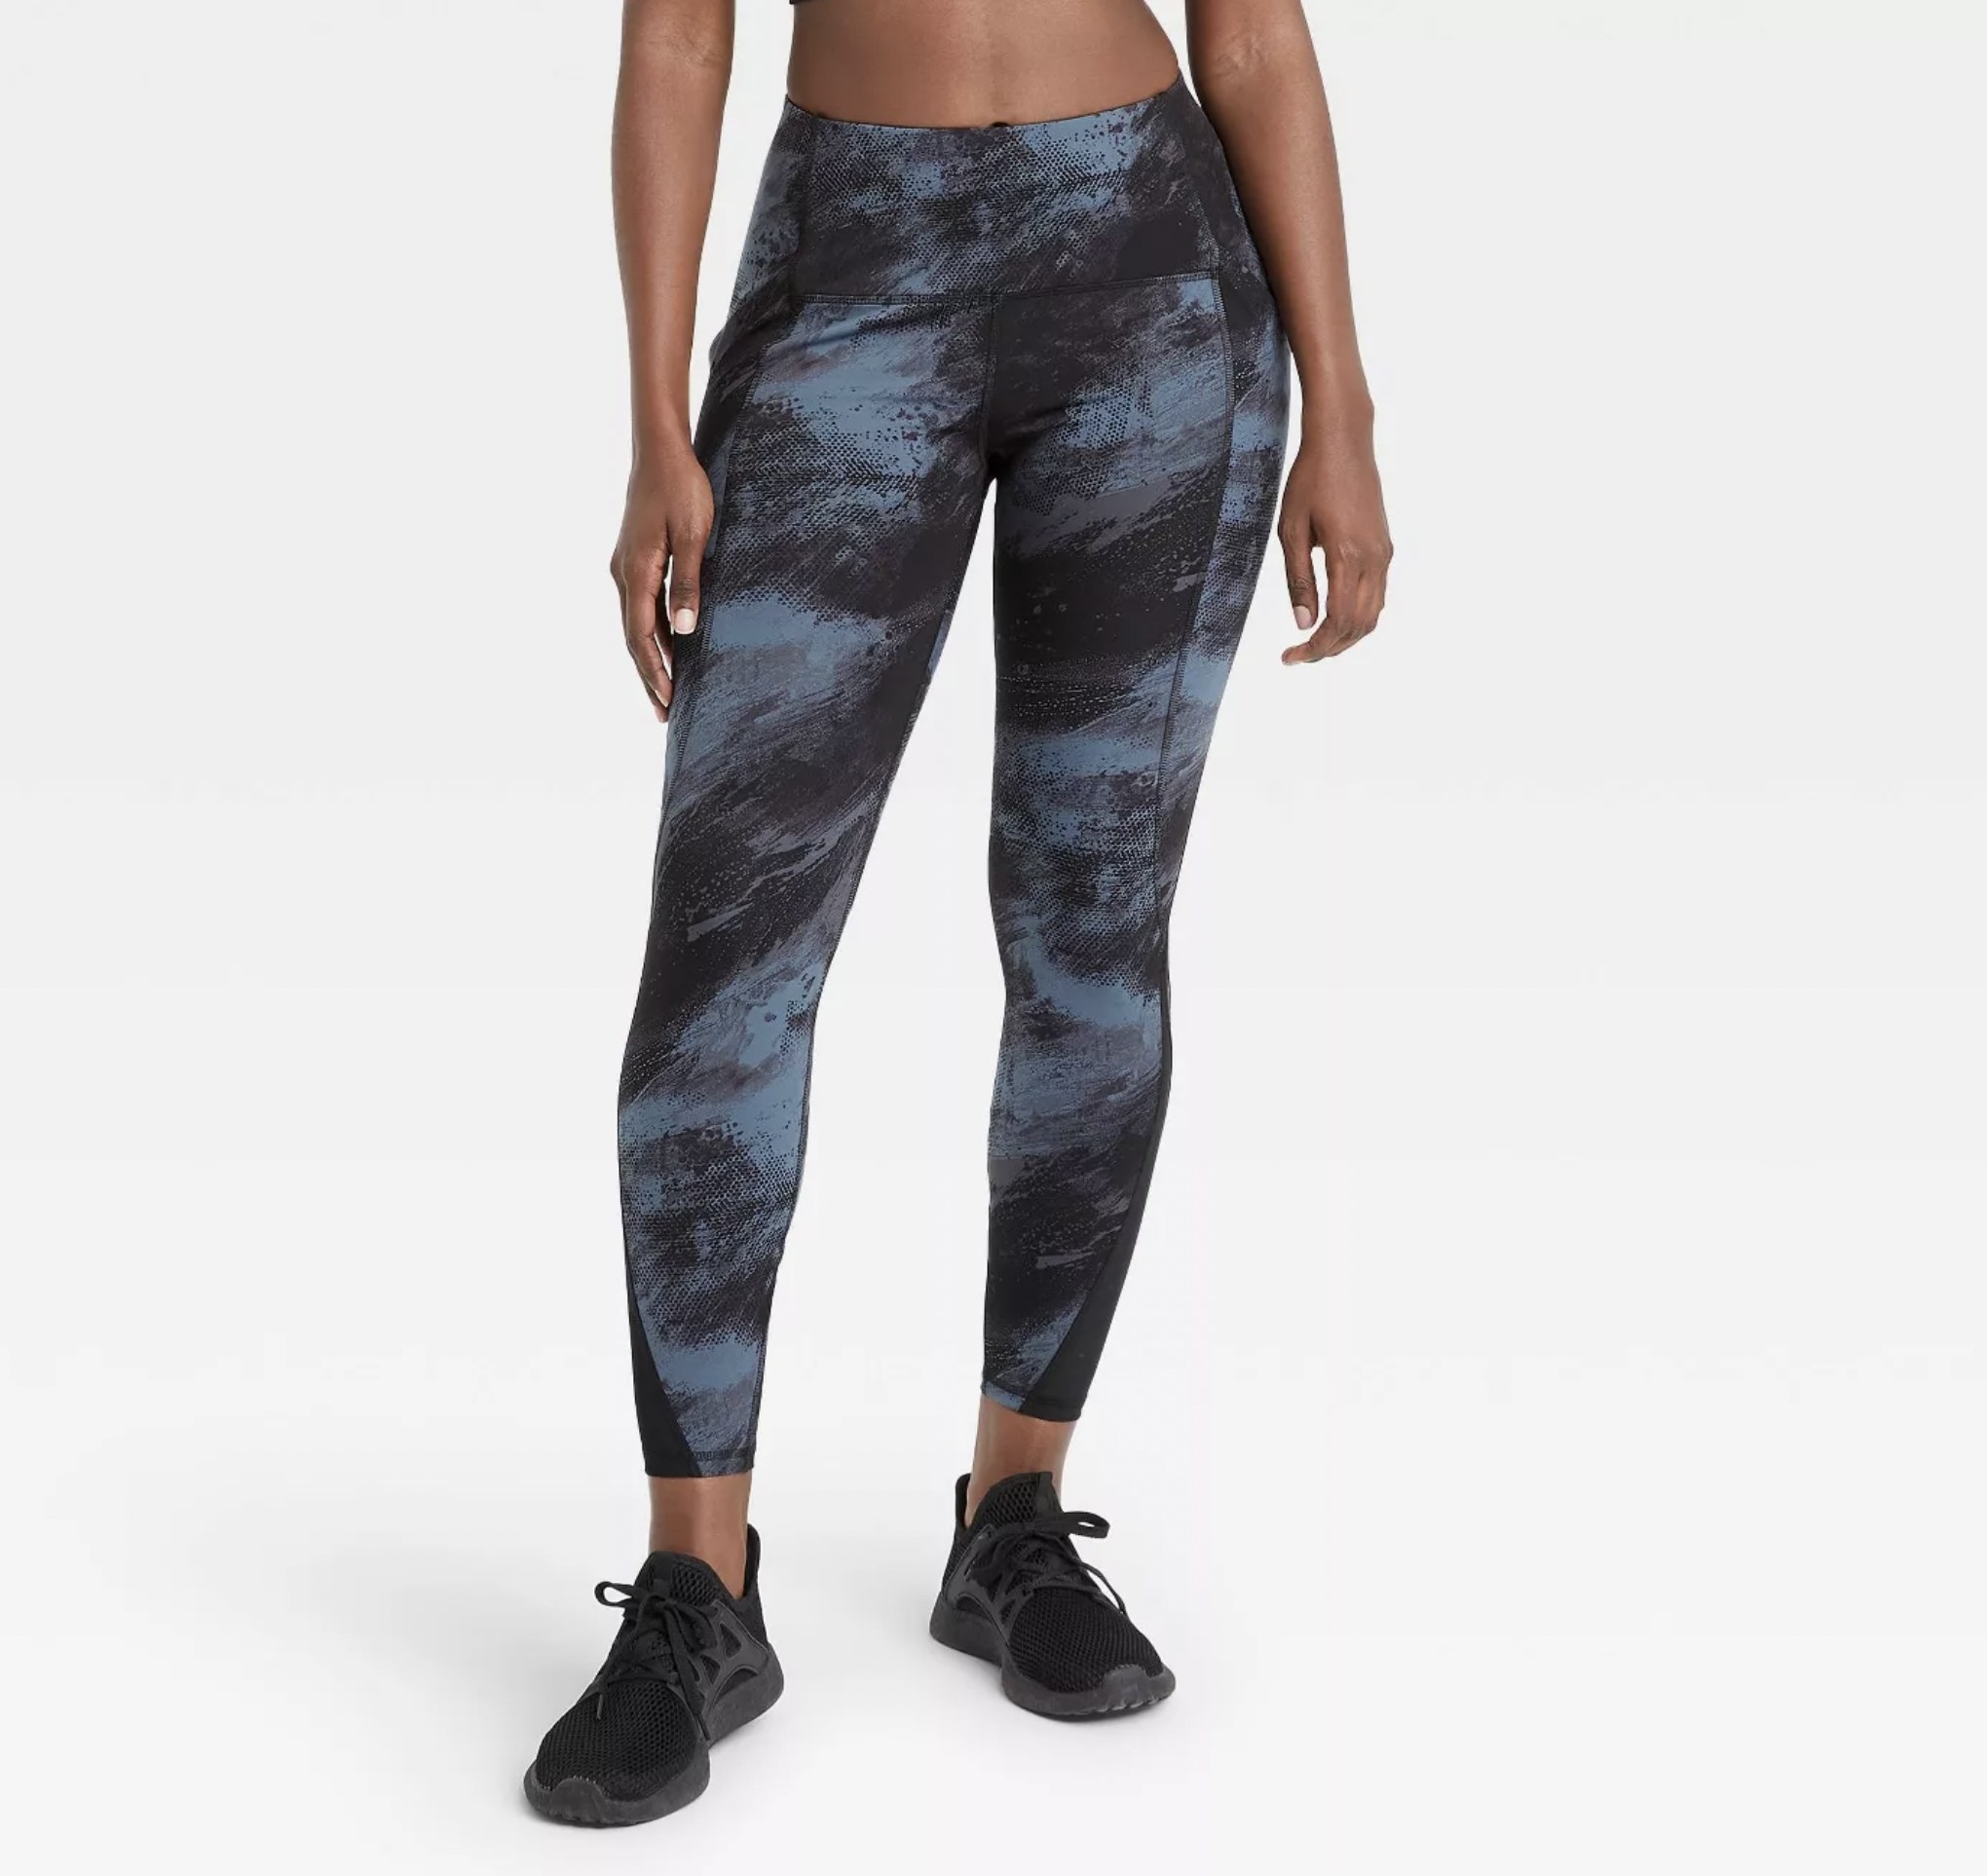 The black and gray marbled leggings